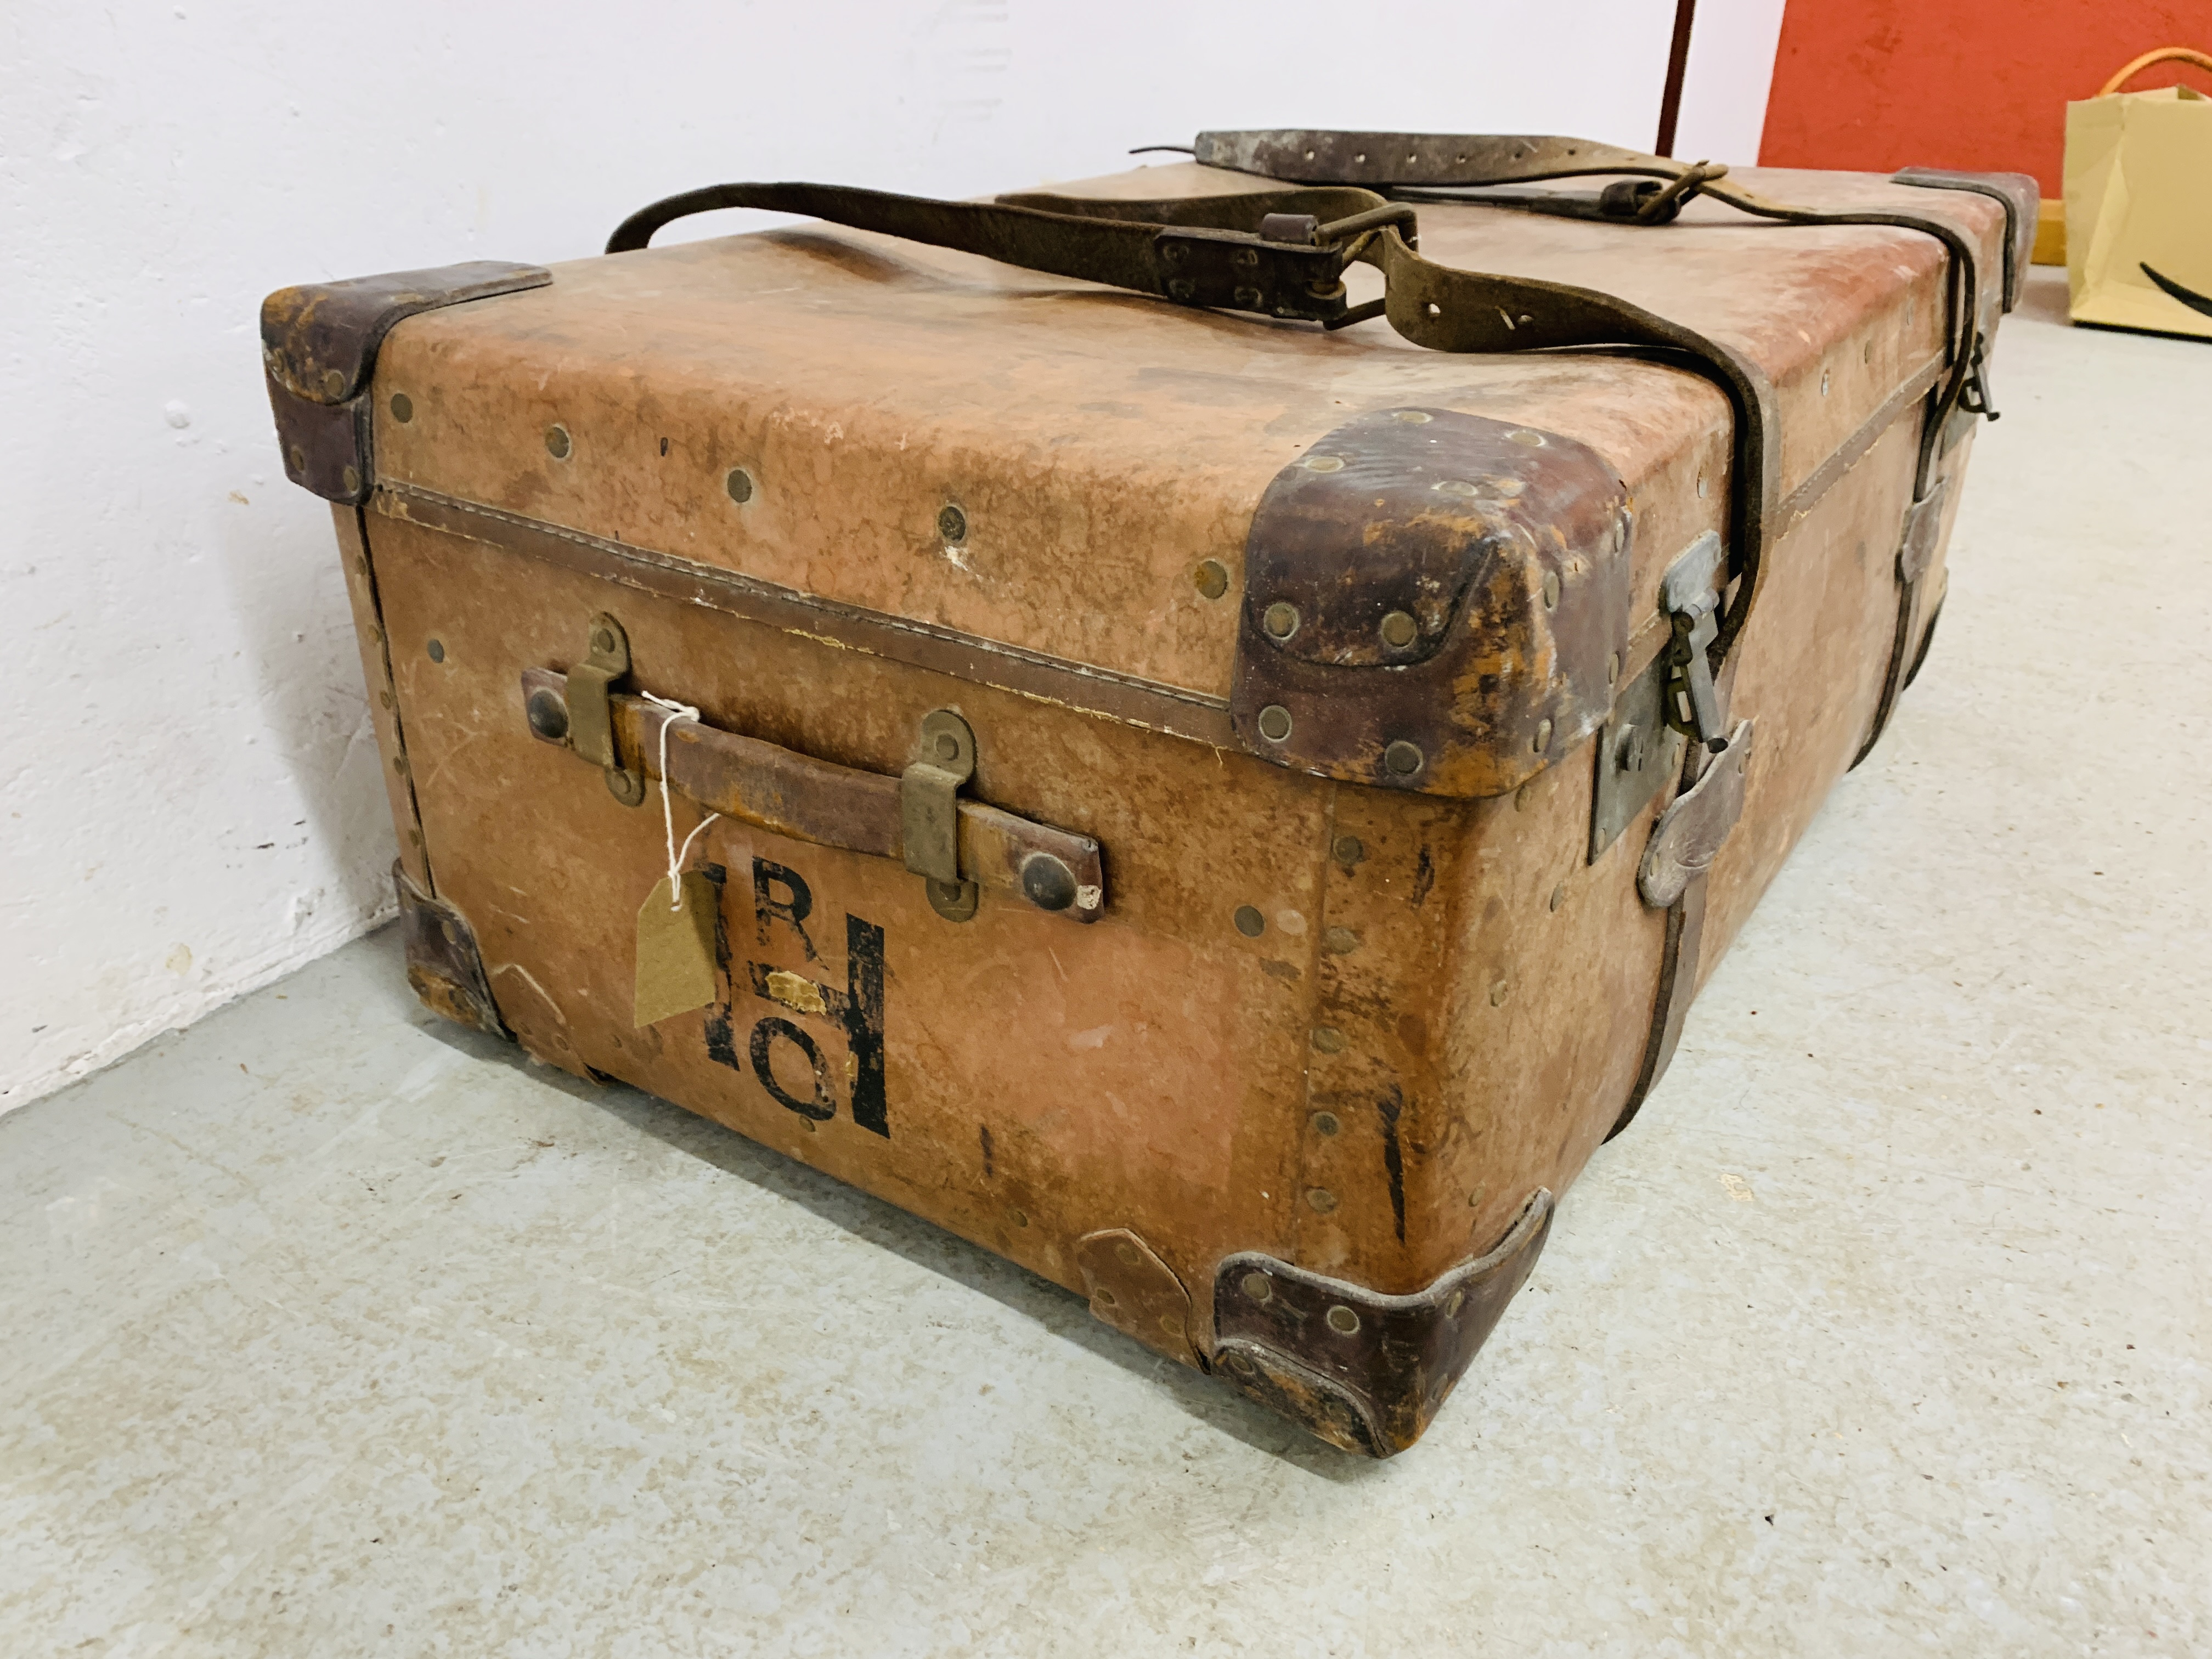 VINTAGE CAVE & SONS "OSILITE" LEATHER BOUND TRAVEL TRUNK - W 87CM, D 51CM, - Image 6 of 10